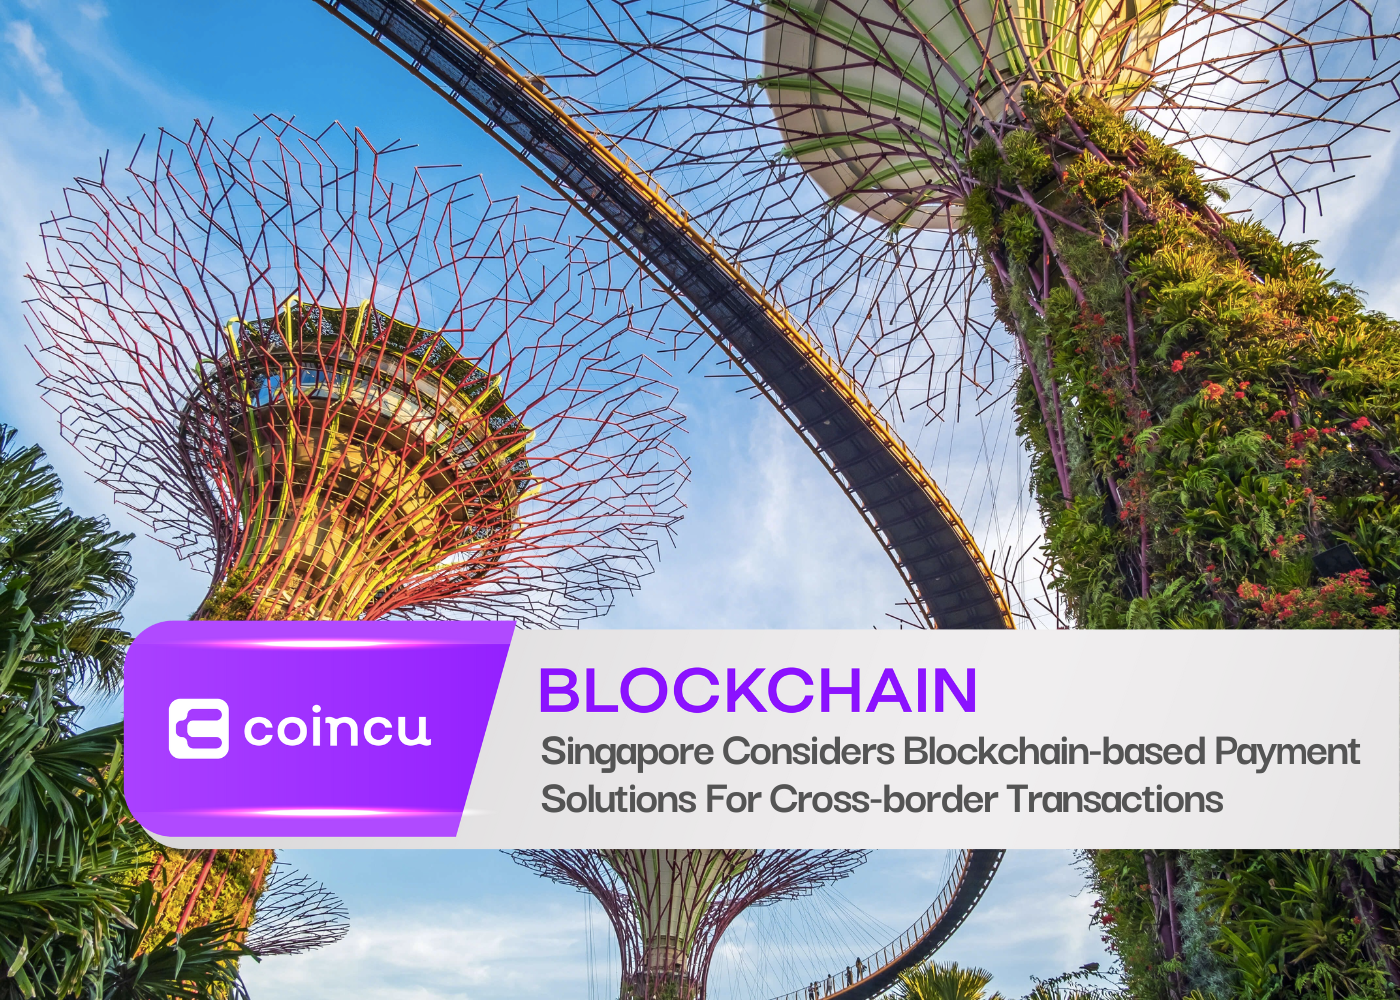 Singapore Considers Blockchain-based Payment Solutions For Cross-border Transactions